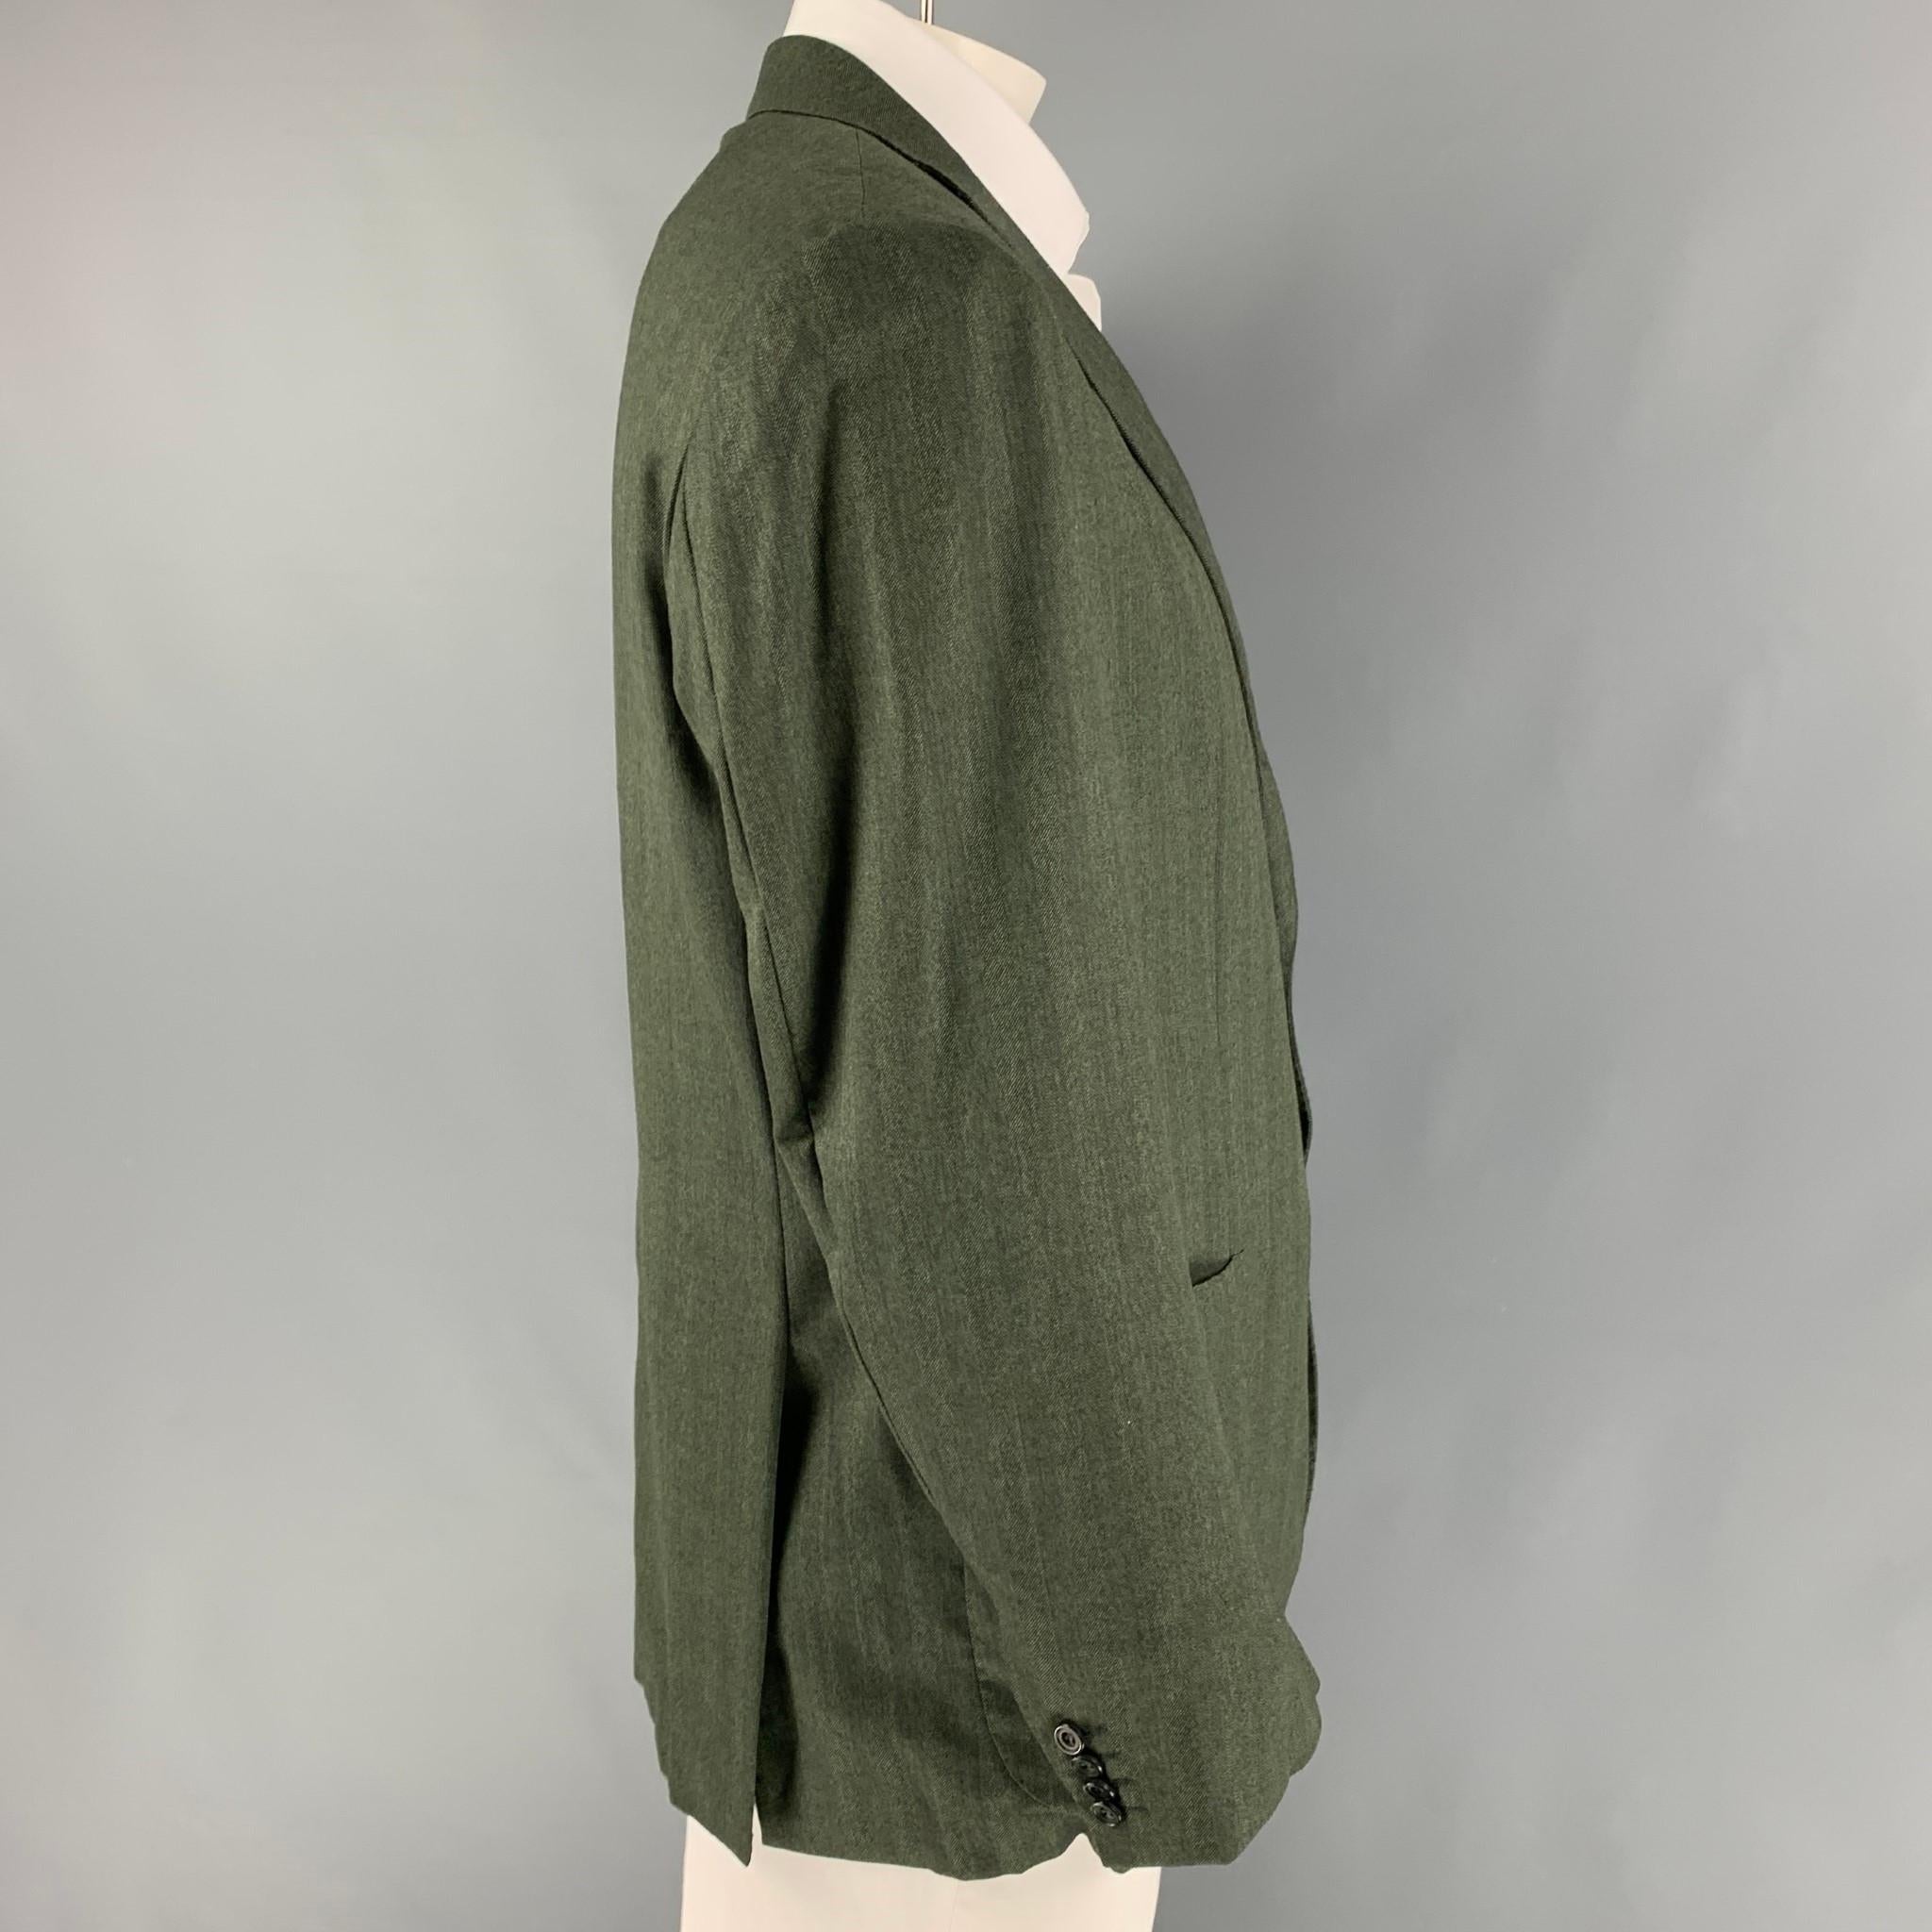 KITON sport coat comes in a green herringbone wool with a full liner featuring a notch lapel, patch pockets, double back vent, and a three button closure. 

Very Good Pre-Owned Condition.
Marked: 54

Measurements:

Shoulder: 19 in.
Chest: 44